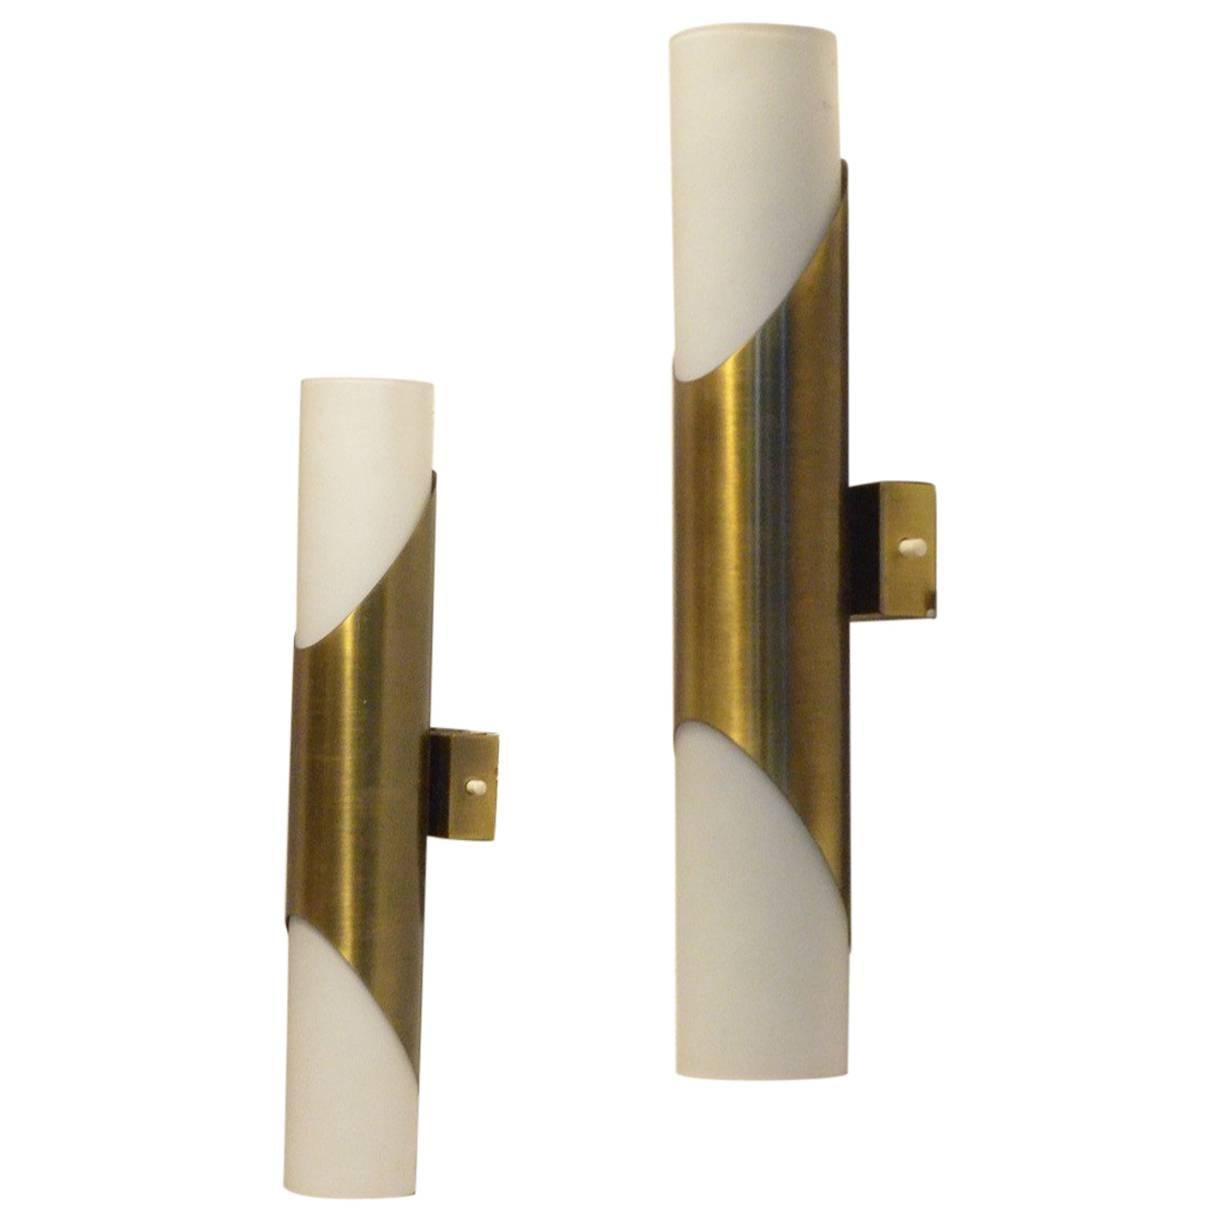 1970s German Vintage Design, Brass and Glass Neuhaus Wall Sconces Lamps